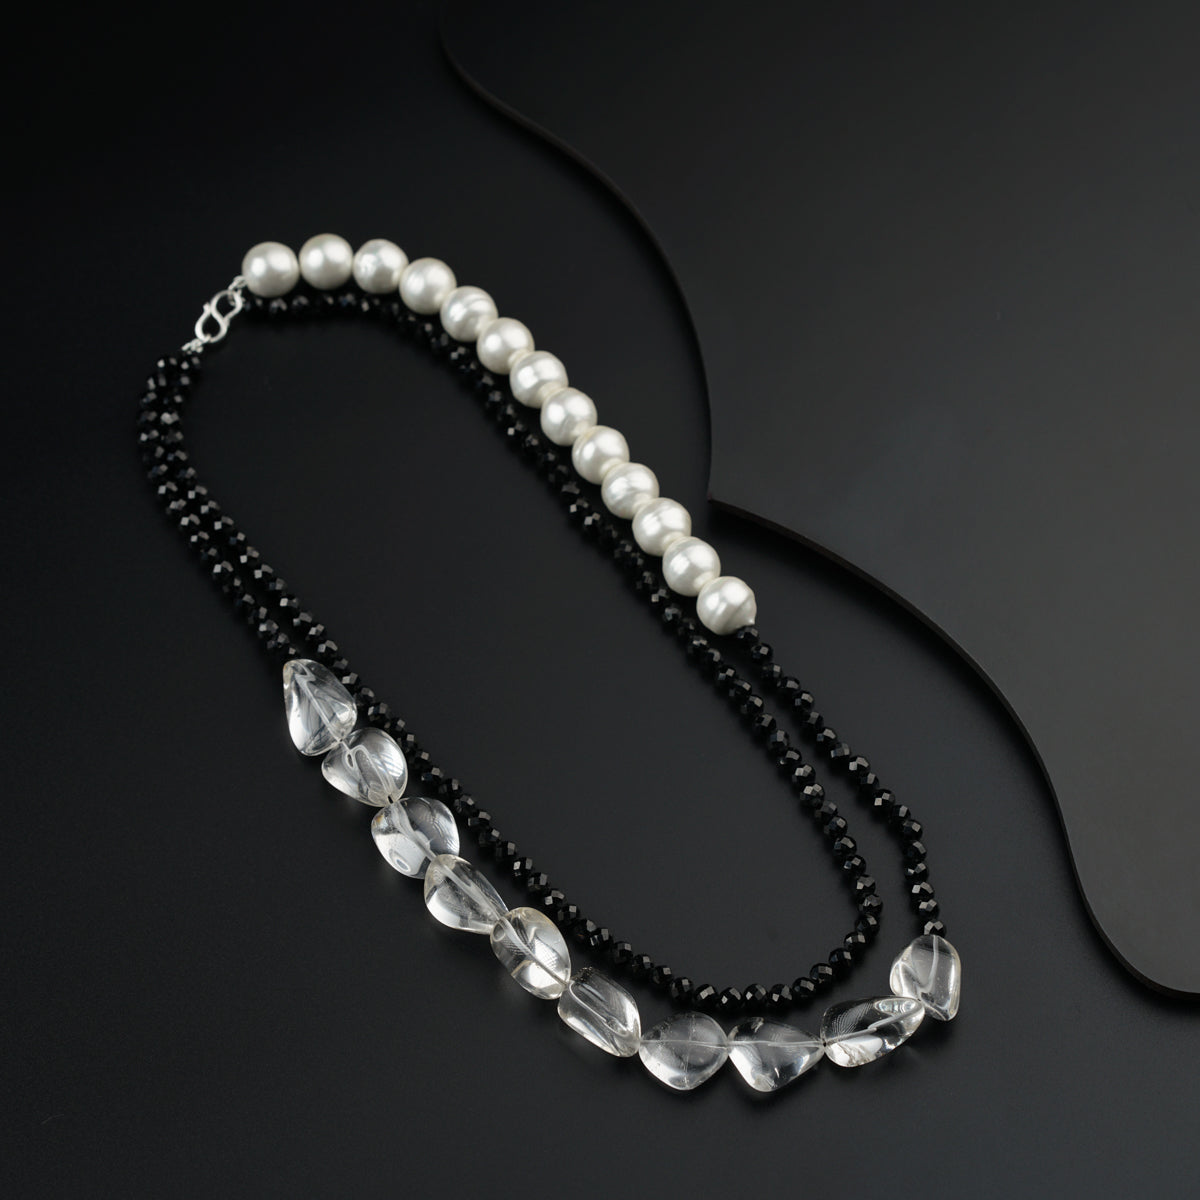 a black and white necklace with pearls and beads